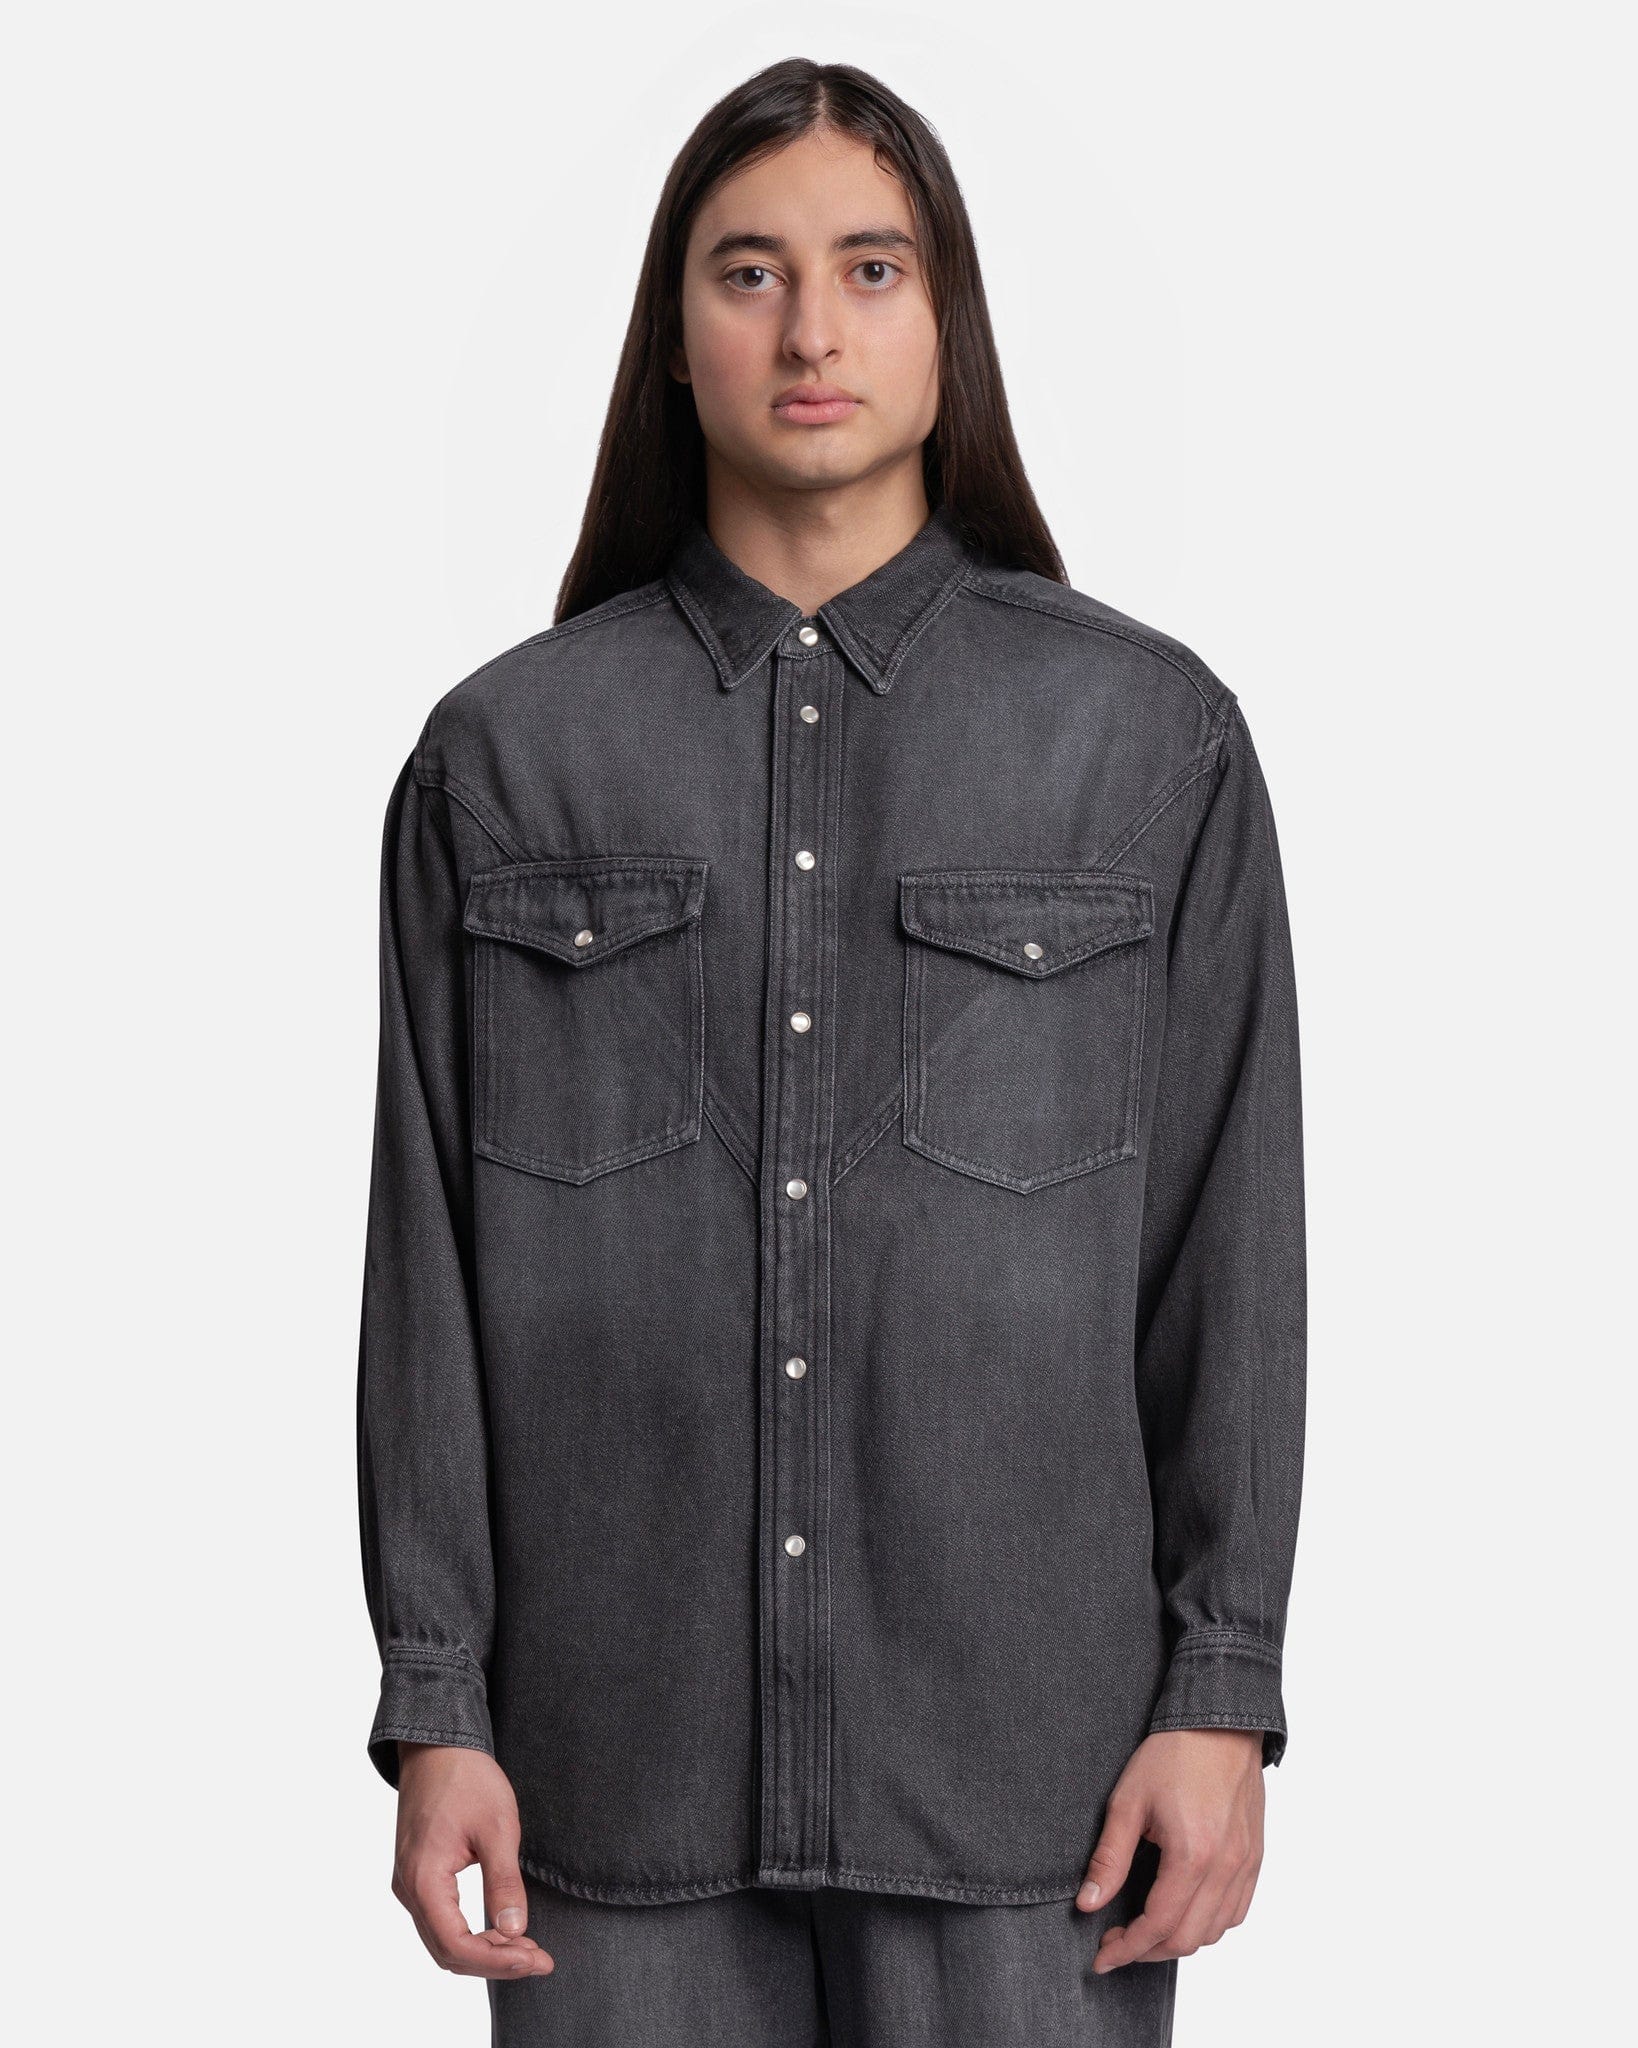 Isabel Marant Homme Men's Shirts Teoma Shirt in Grey